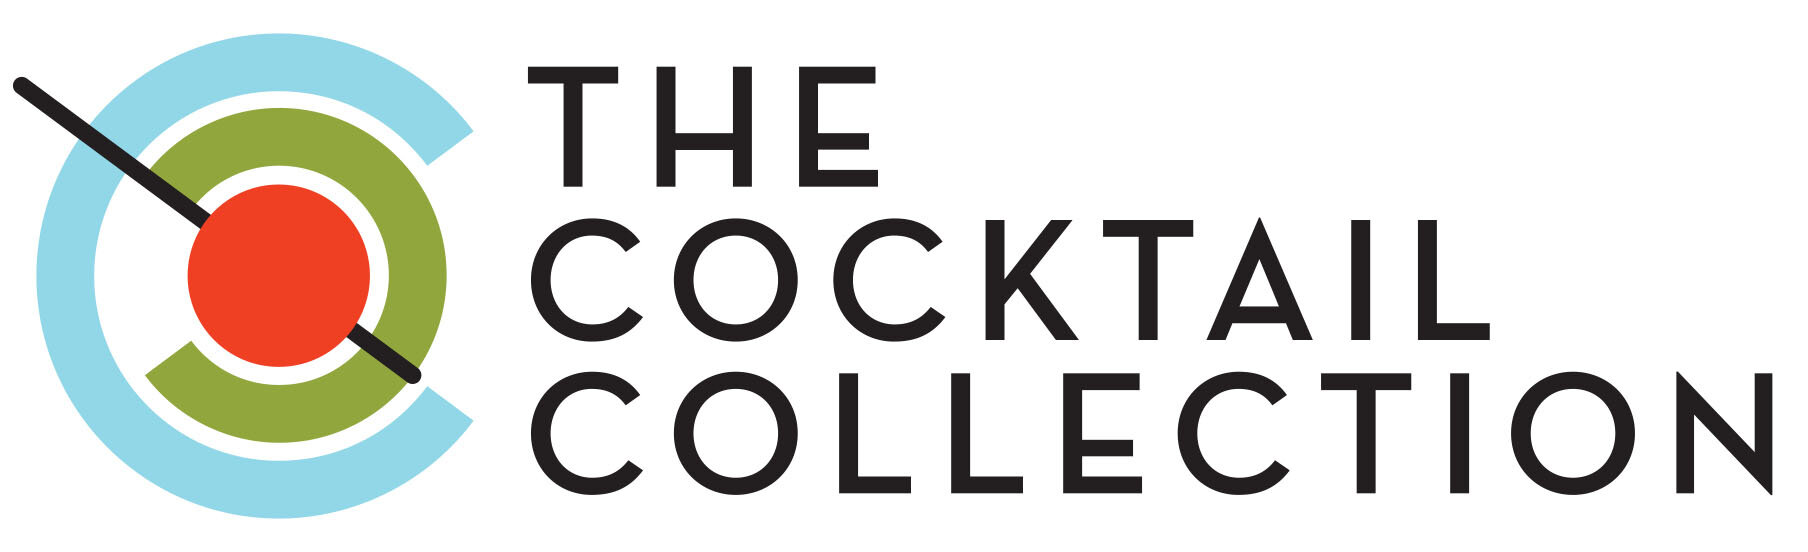 The Cocktail Collection logo color.jpg